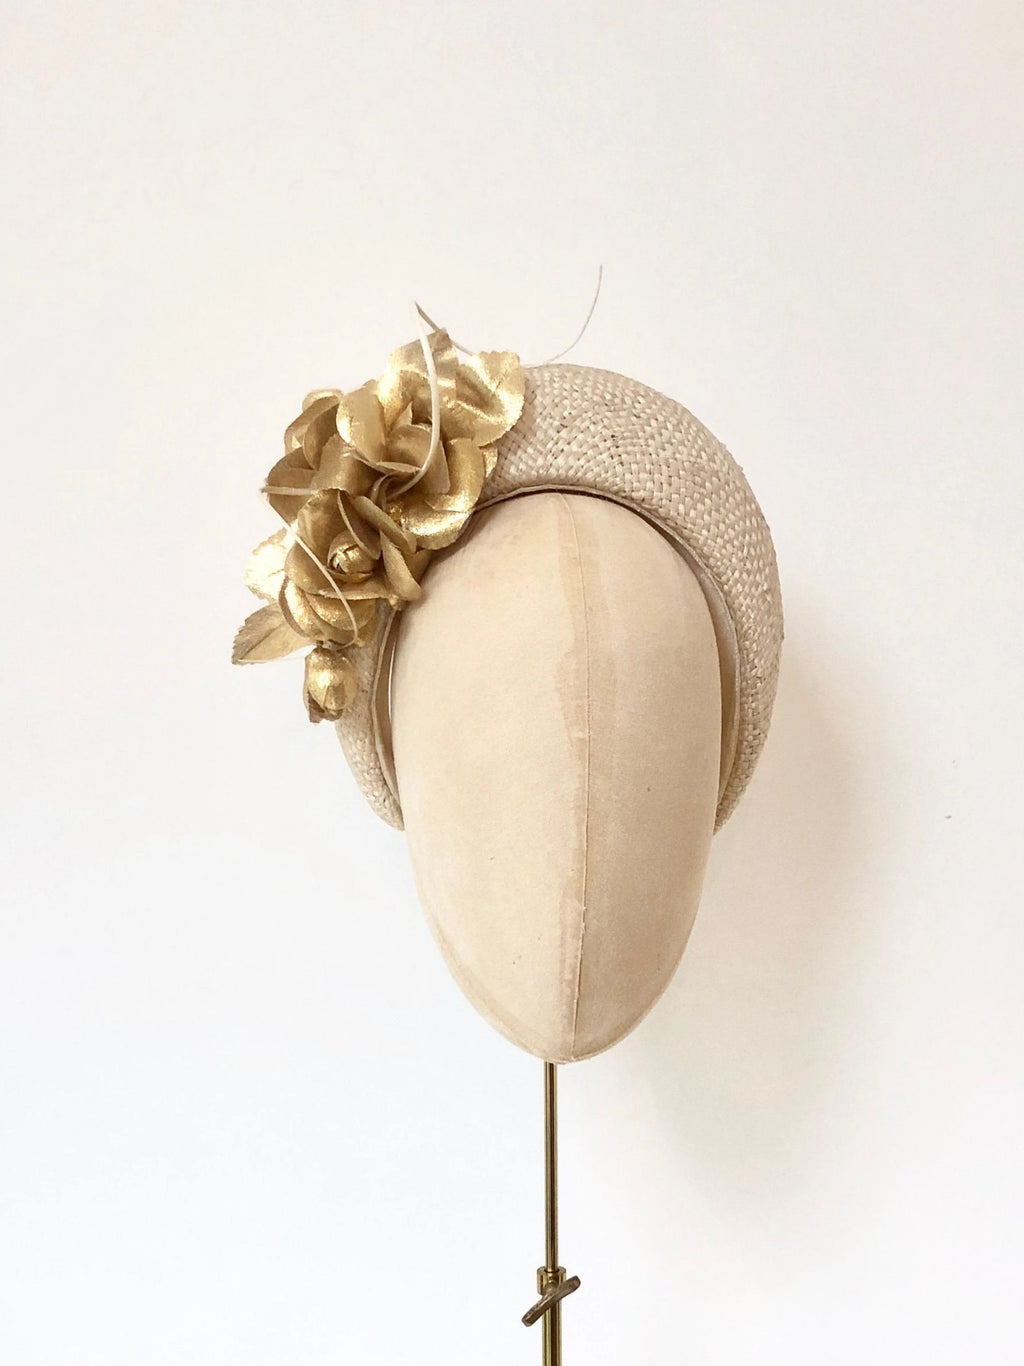 ivory straw halo crown padded headband, kate middleton style, with gold metallic fabric flowers